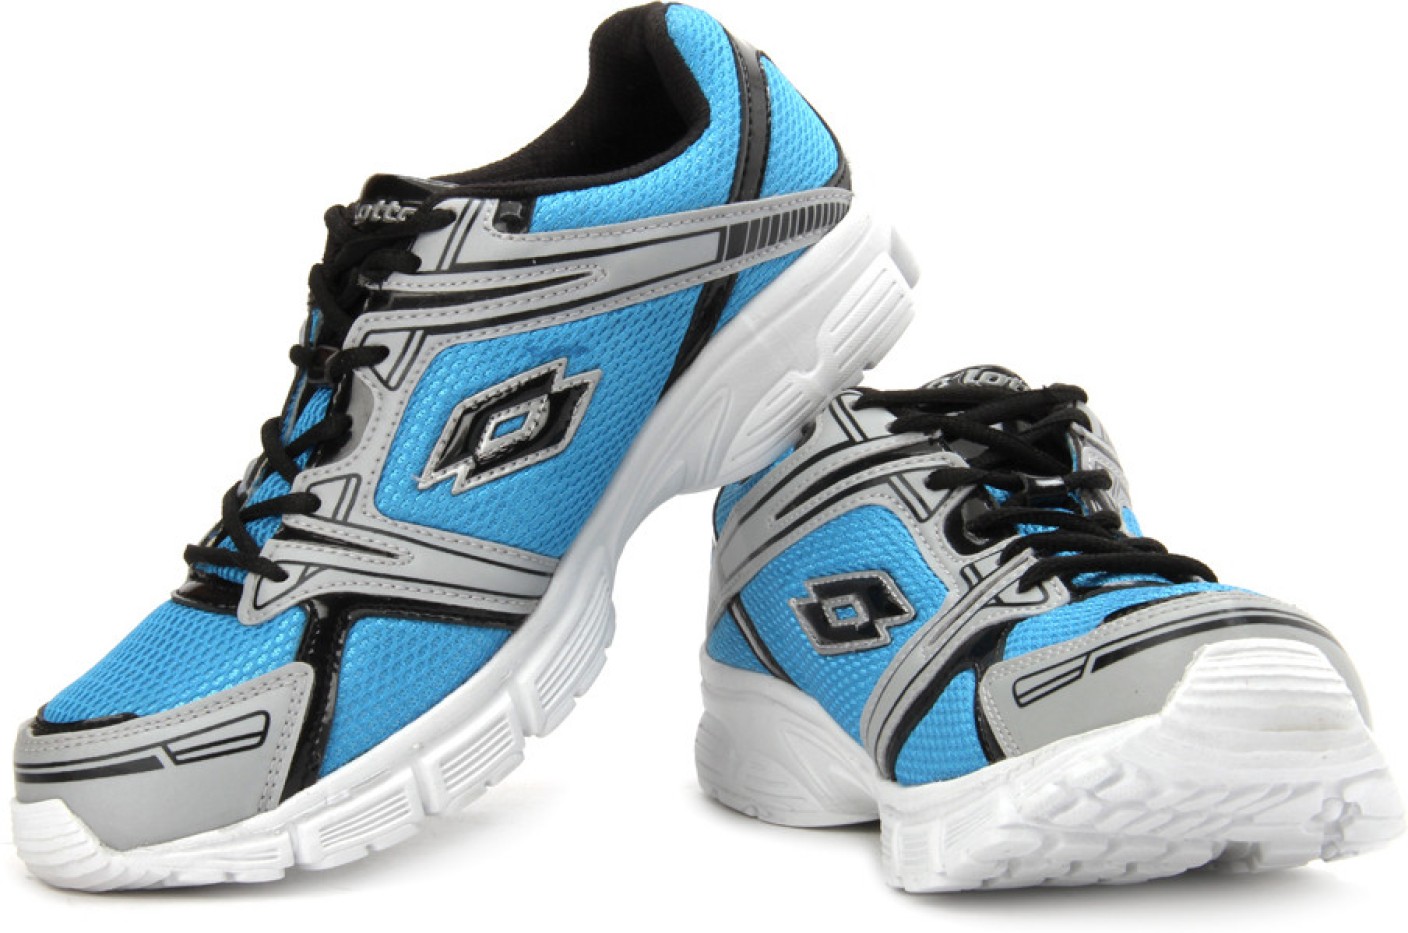 Lotto Zion Running Shoes For Men - Buy Blue, Grey, Black Color Lotto ...